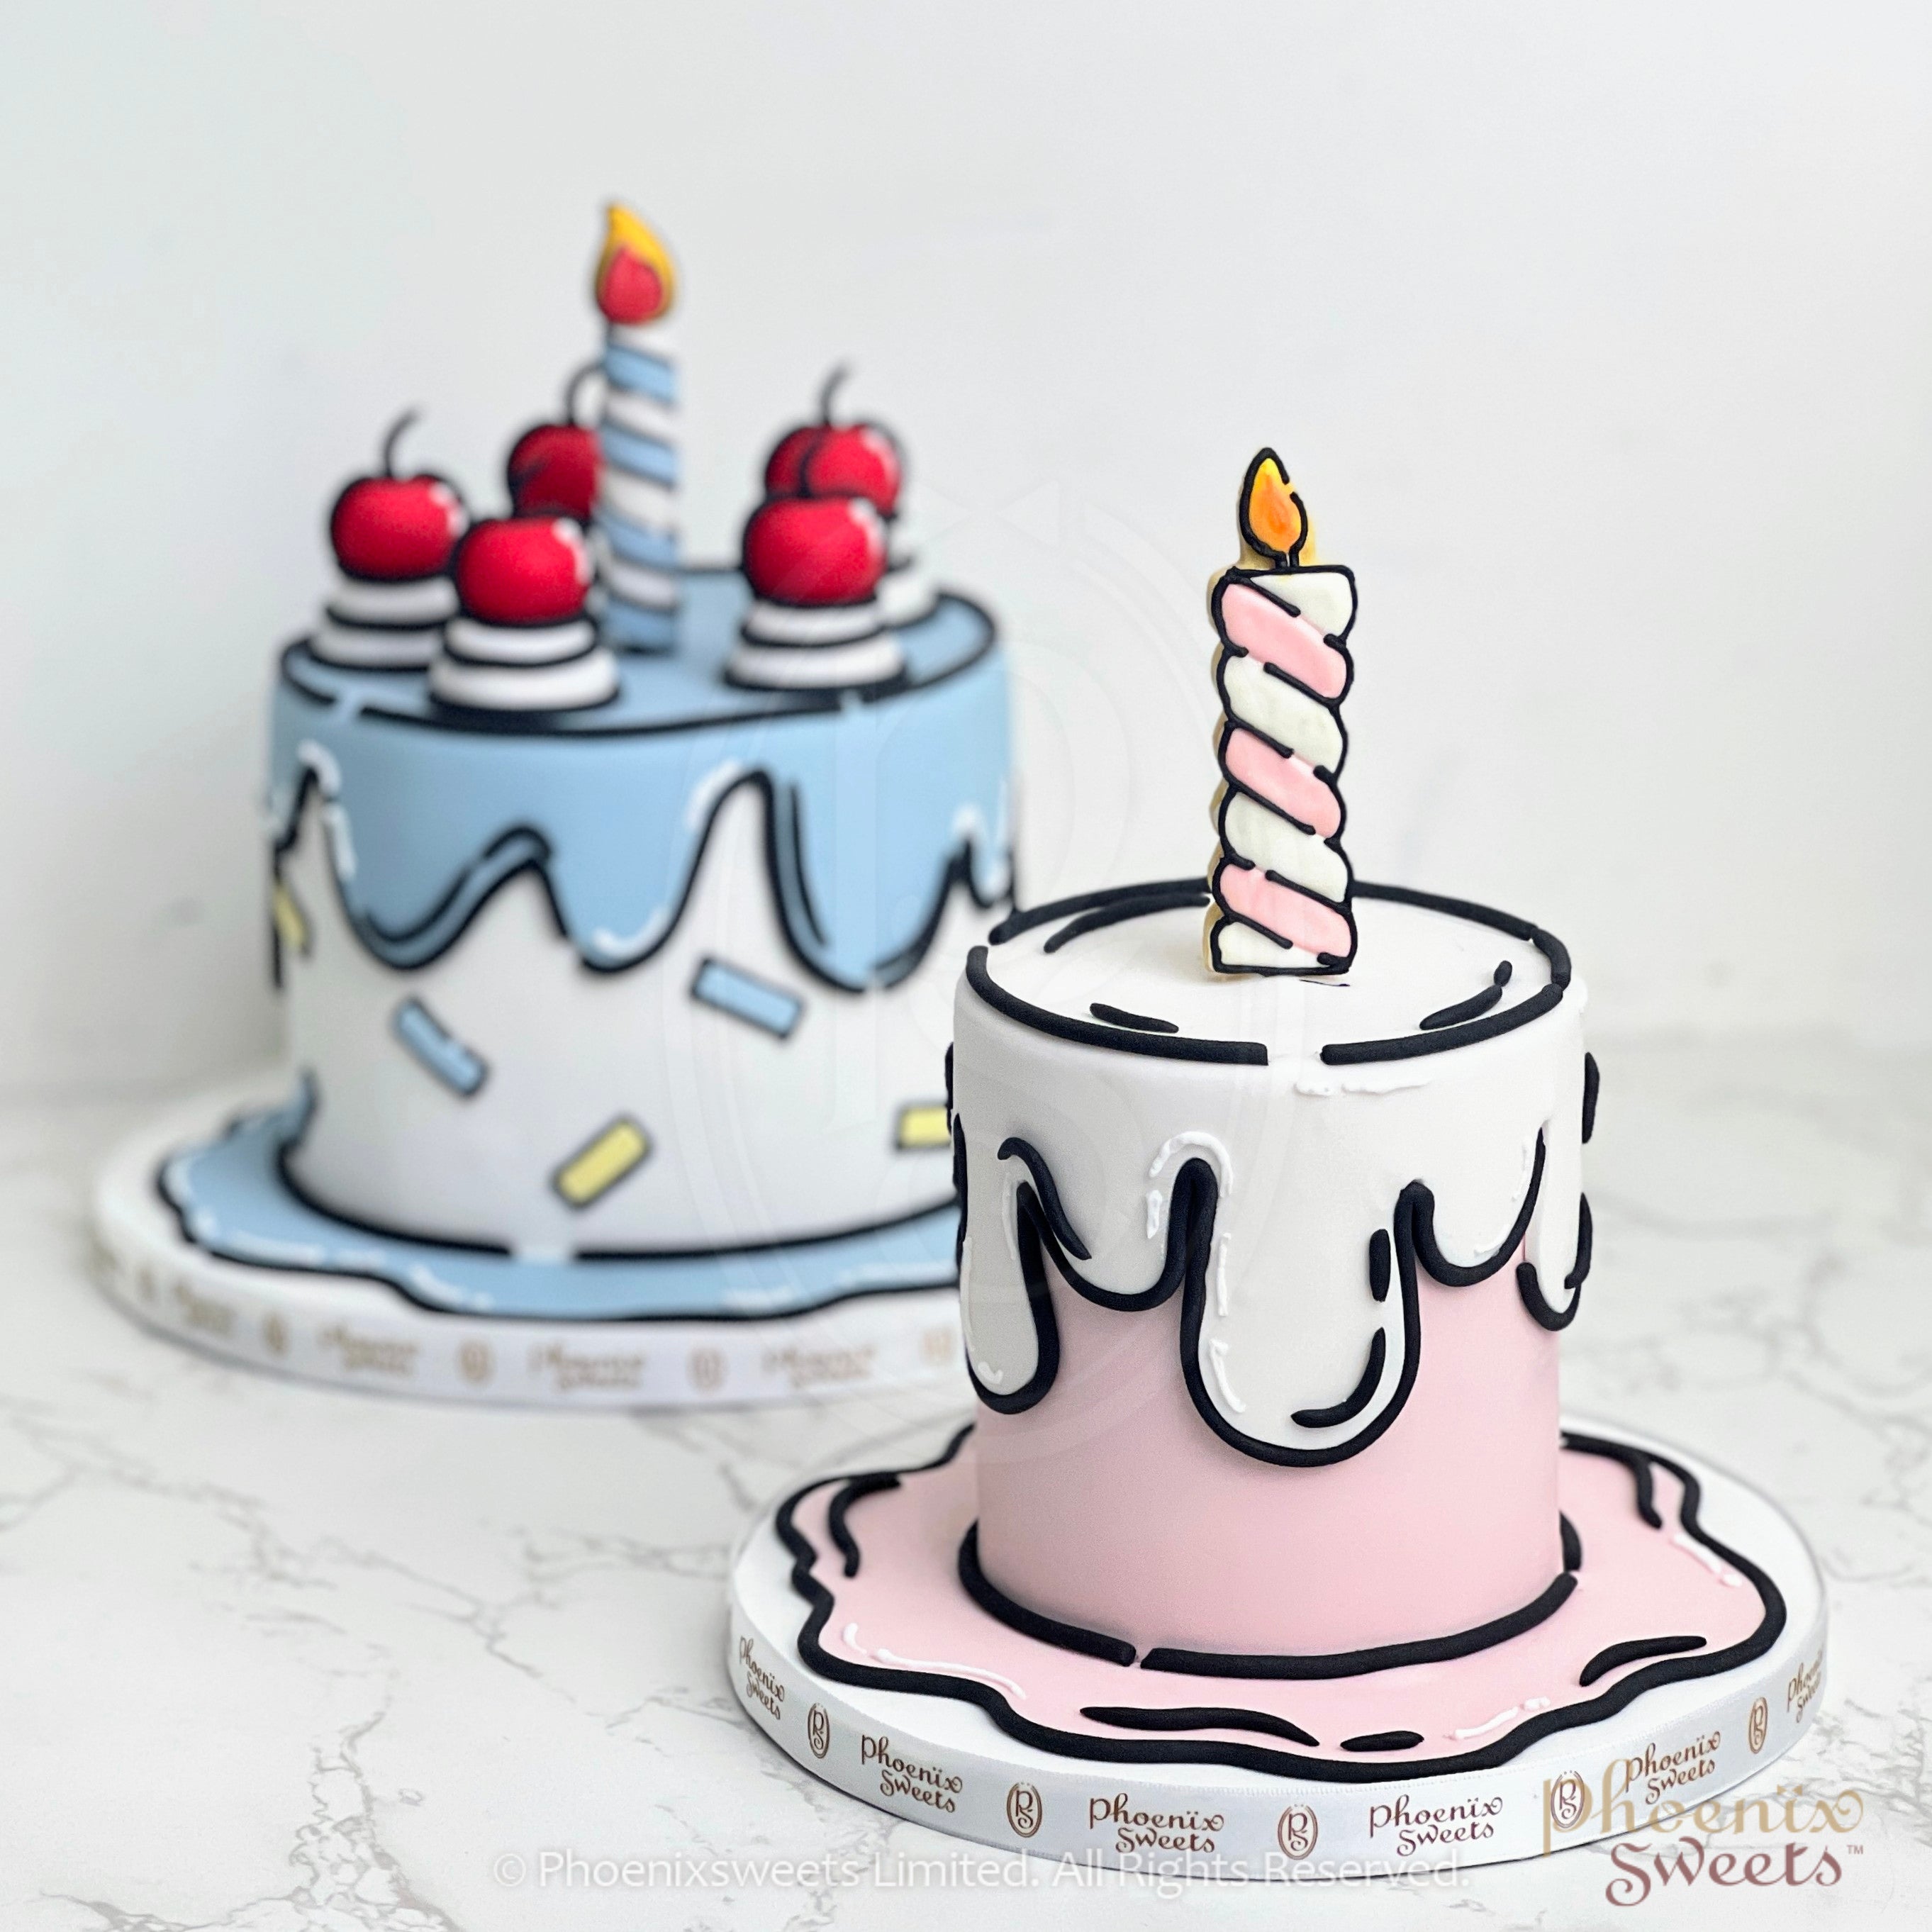 Online Comical Treat Birthday Red Velvet Cake Gift Delivery in UAE - FNP